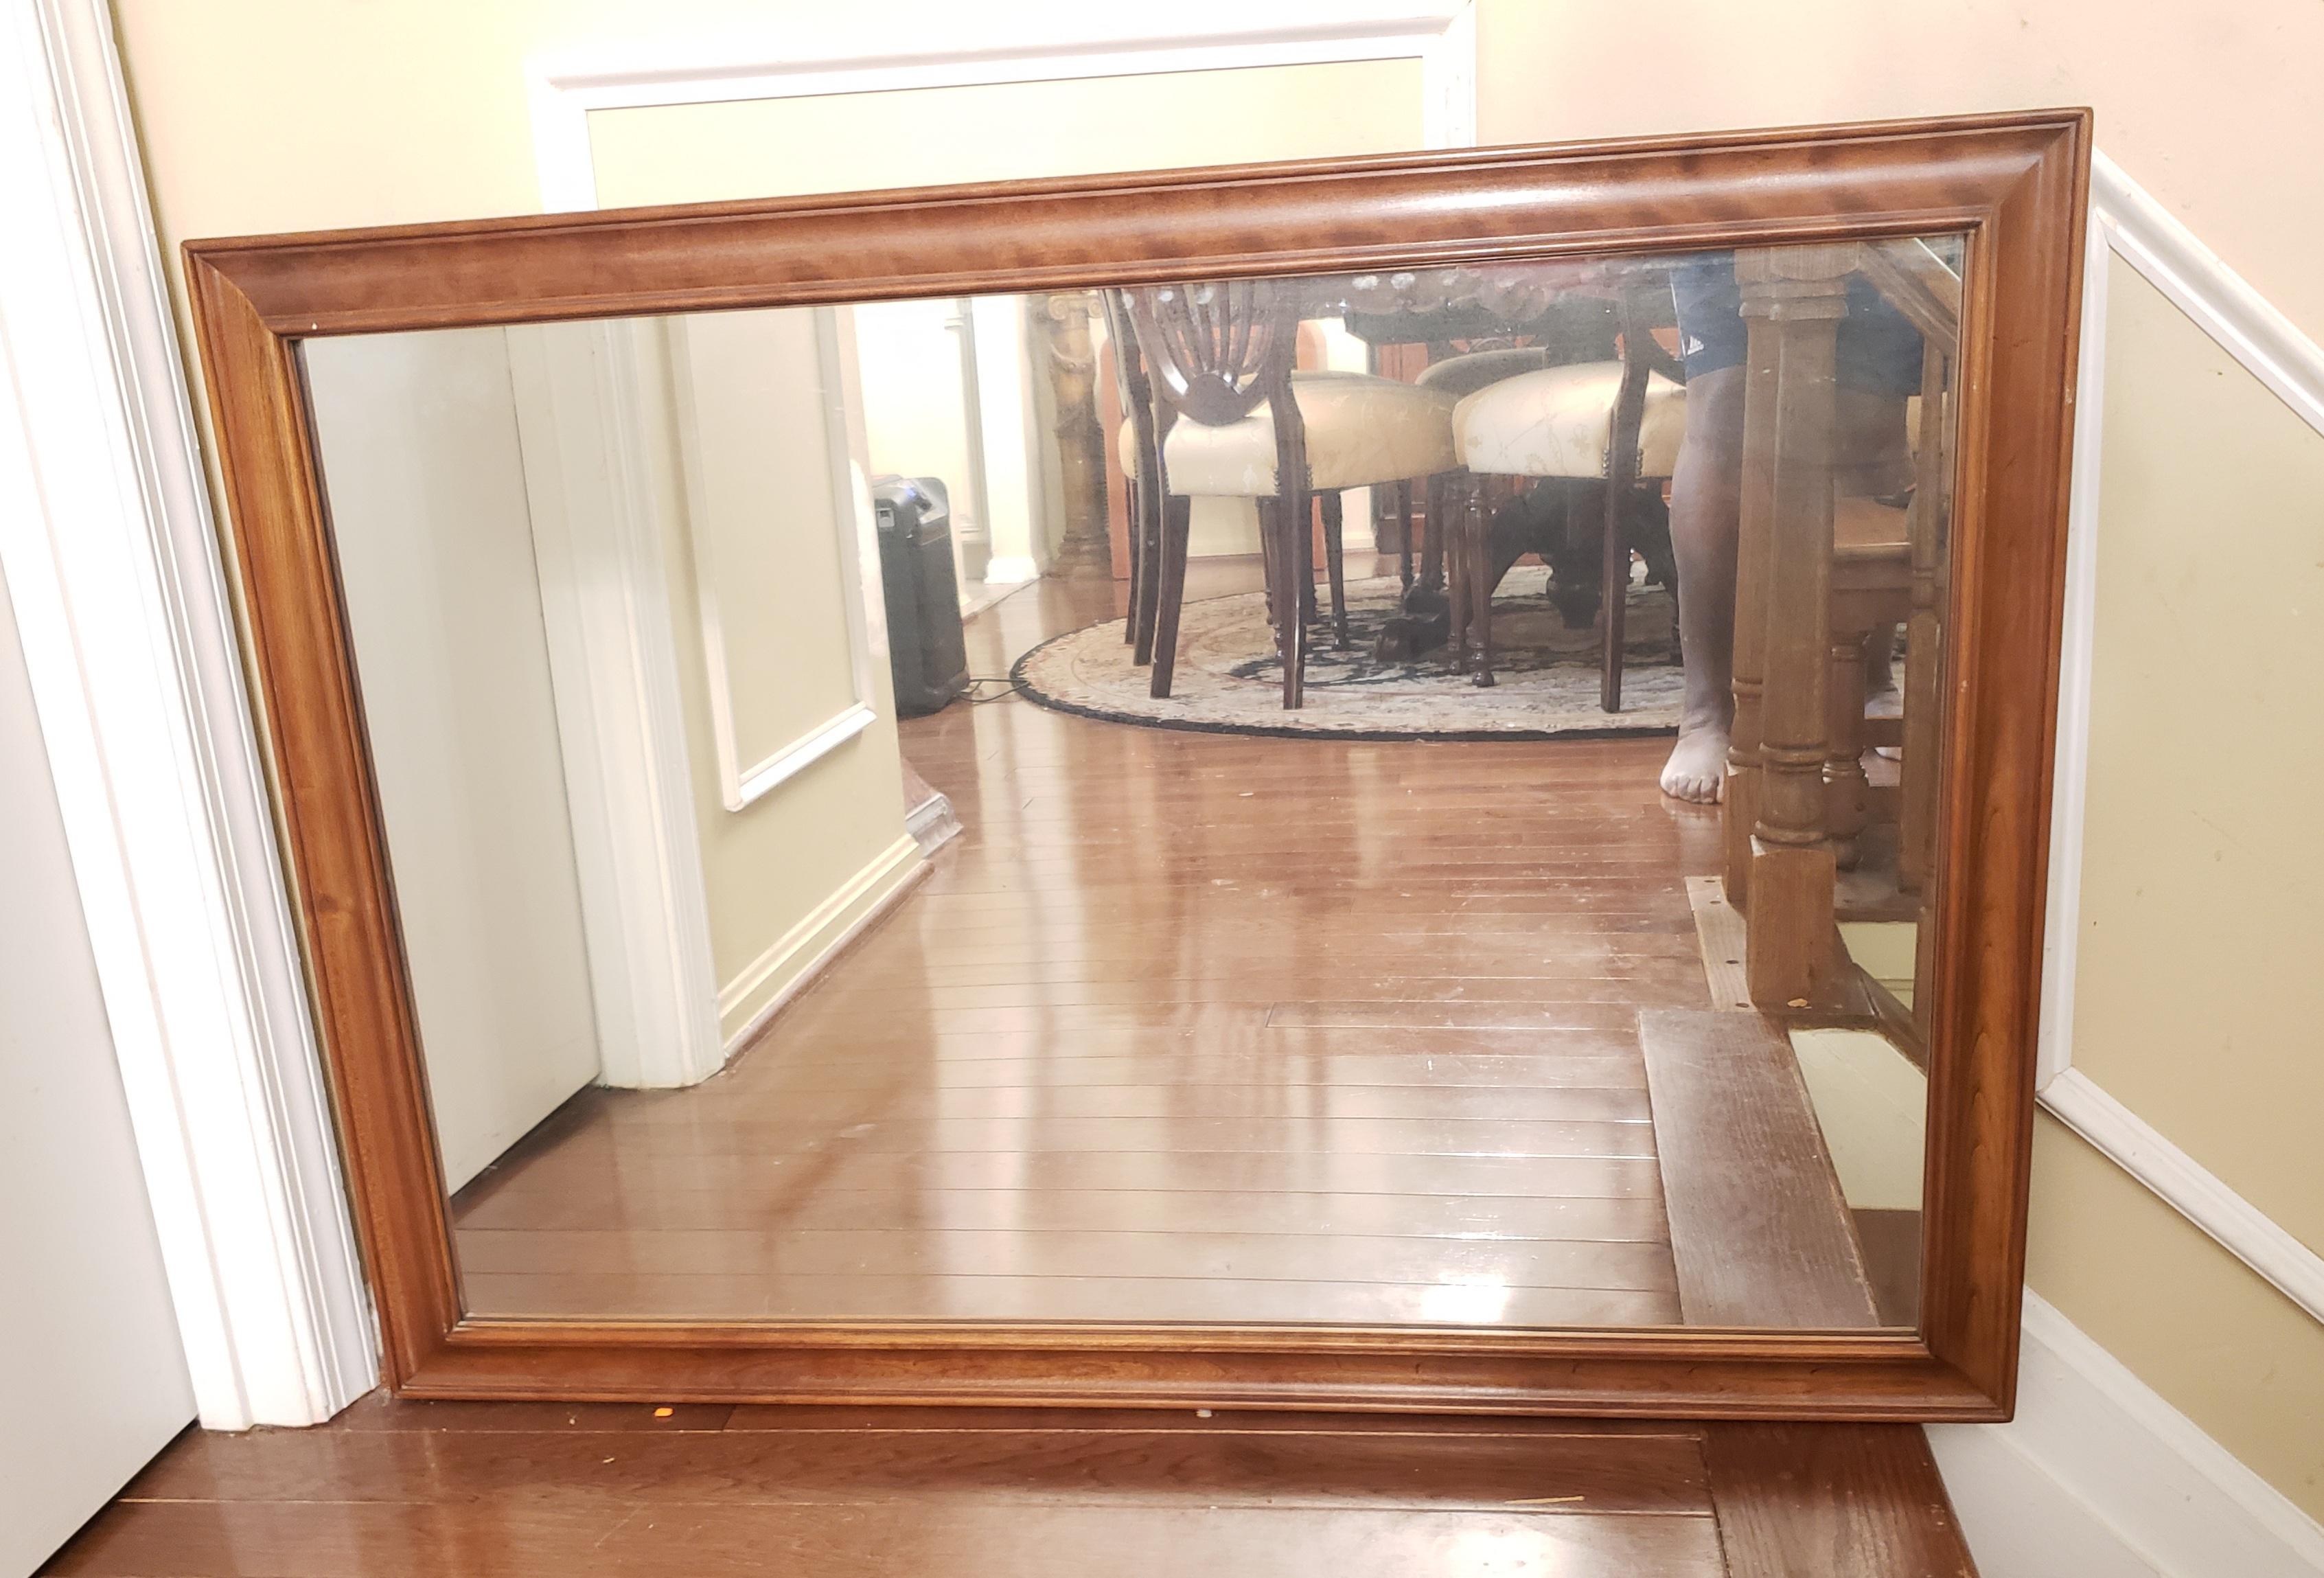 A beautiful, rectangular, solid cherry mirror
with Simple classic design that easily compliments any décor.
Stunning accent piece built with the classic design of L Stickley and legendary construction John A Colby and Sons has been known to create